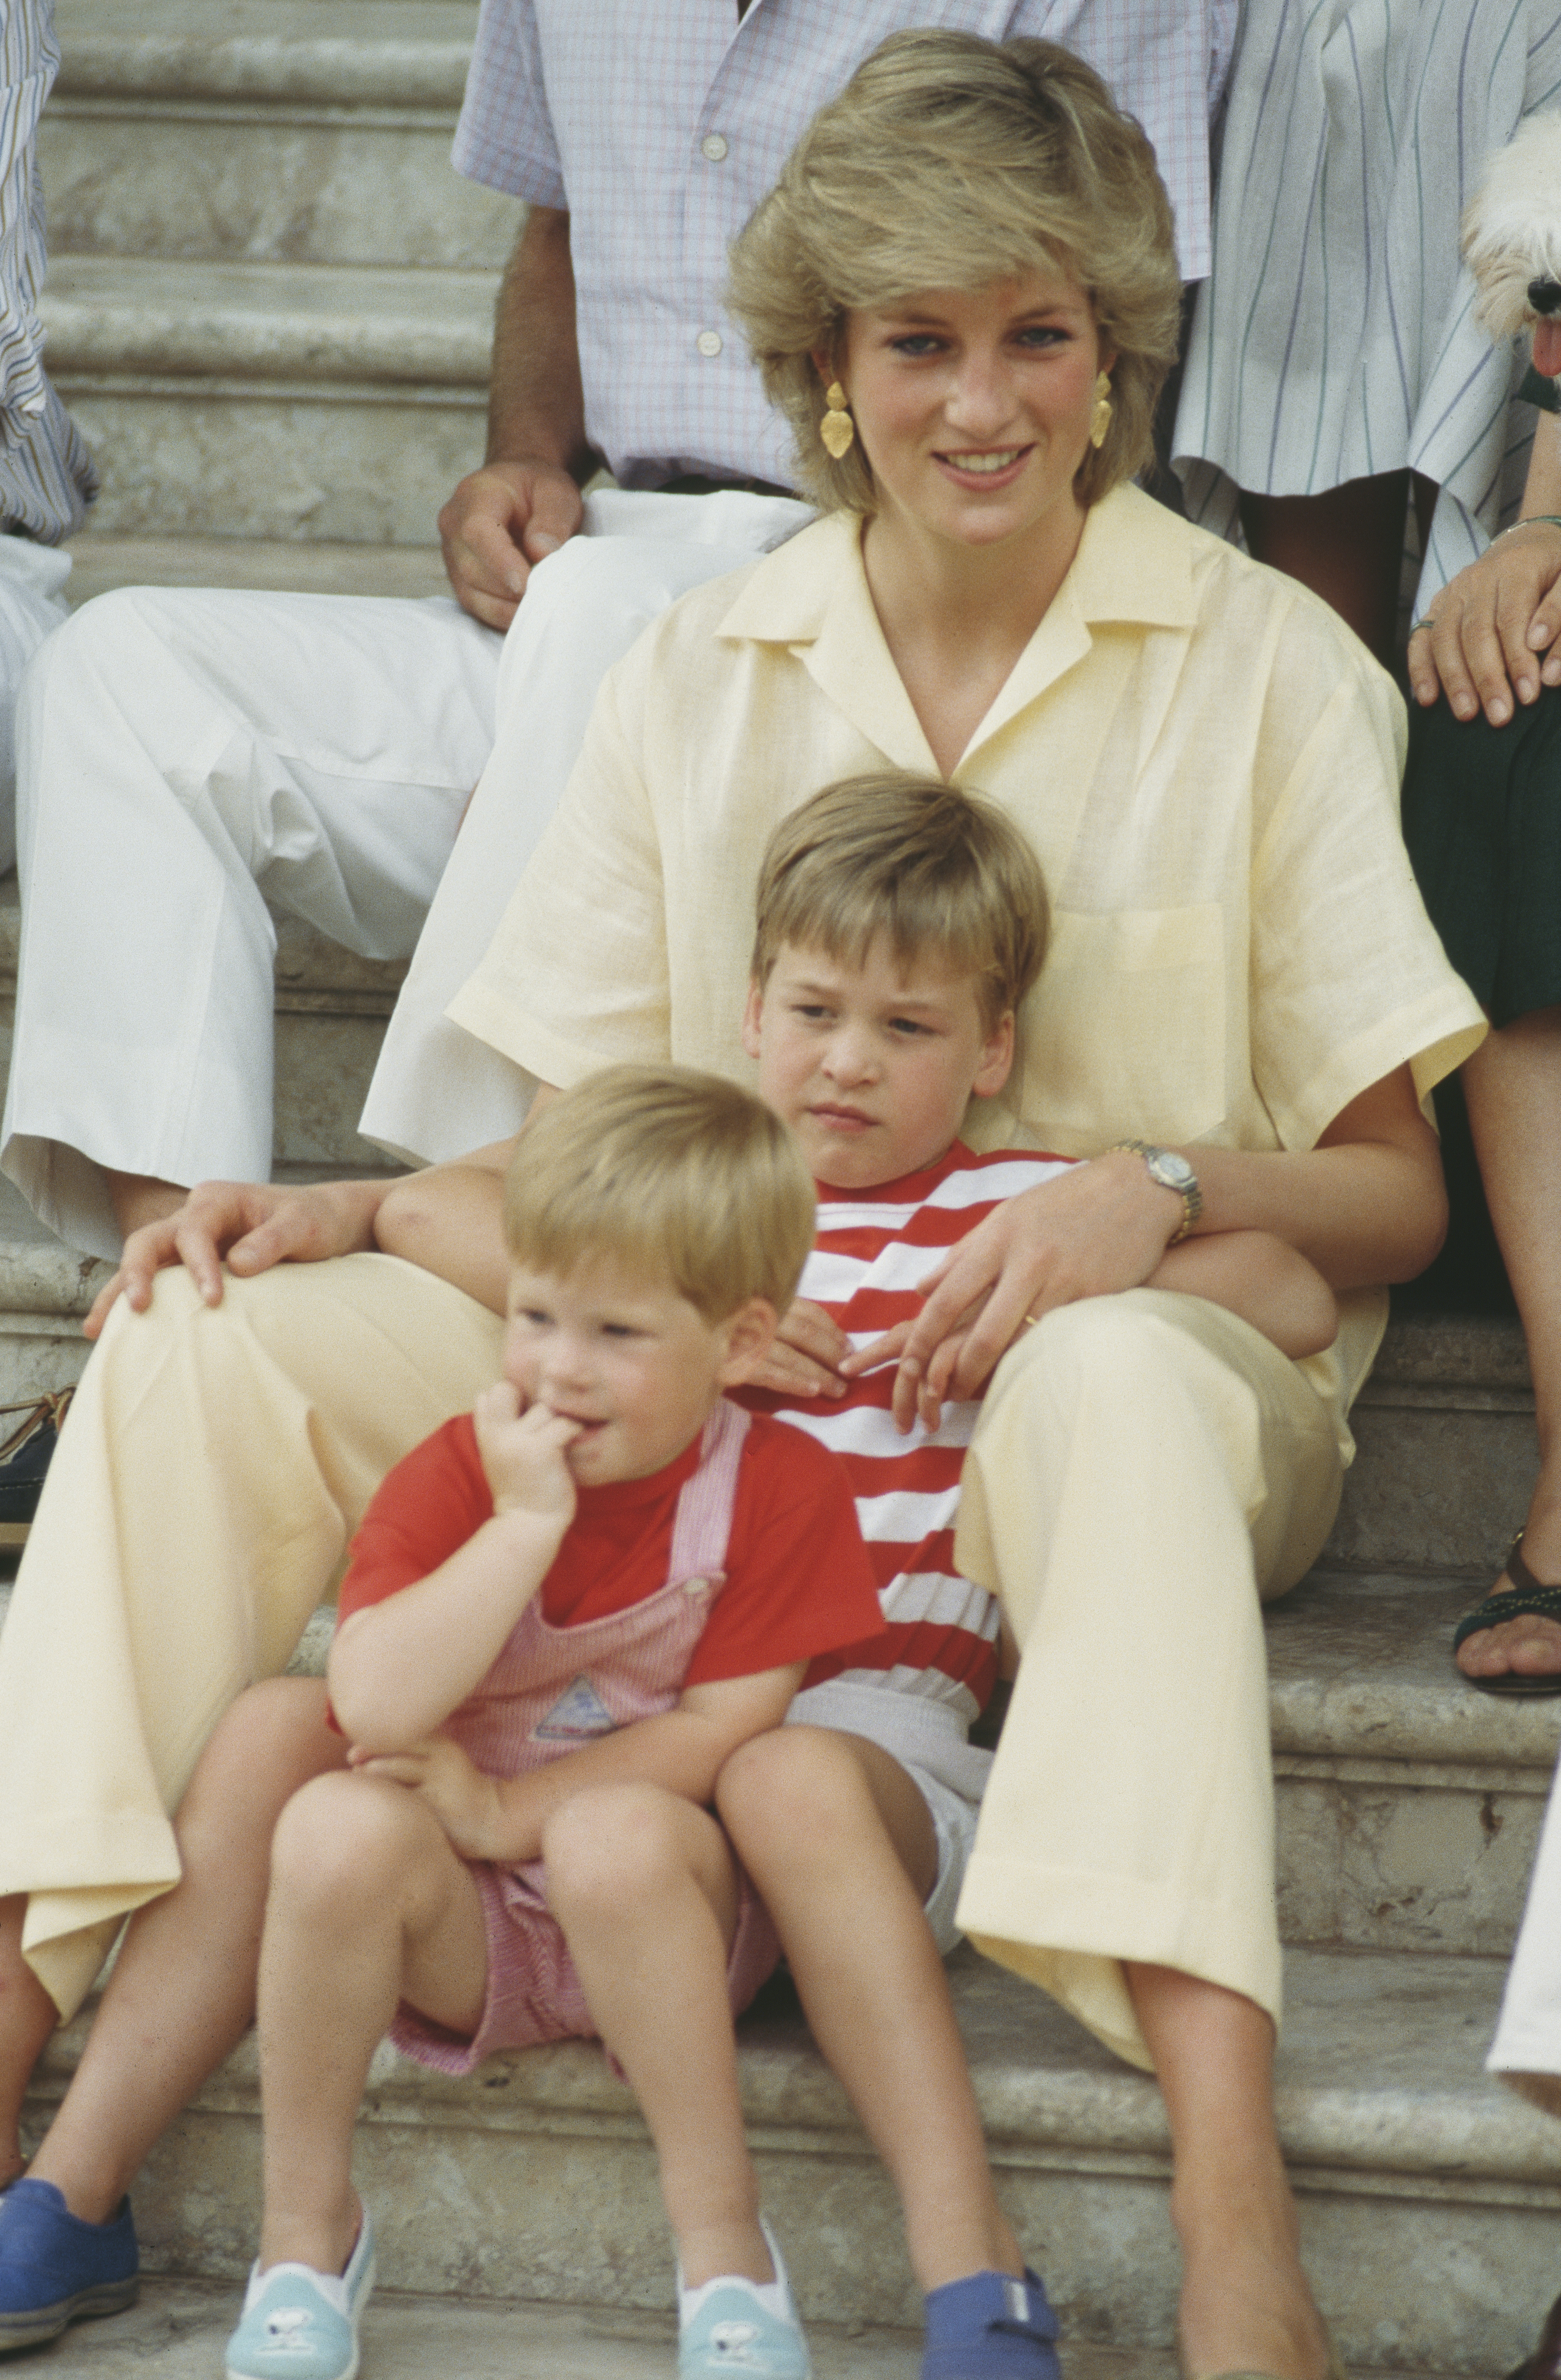 Princess Diana and her sons, Prince William and Prince Harry, at the Spanish royal family at the Marivent Palace in Palma de Mallorca, Spain, in August 1987. | Source: Getty Images